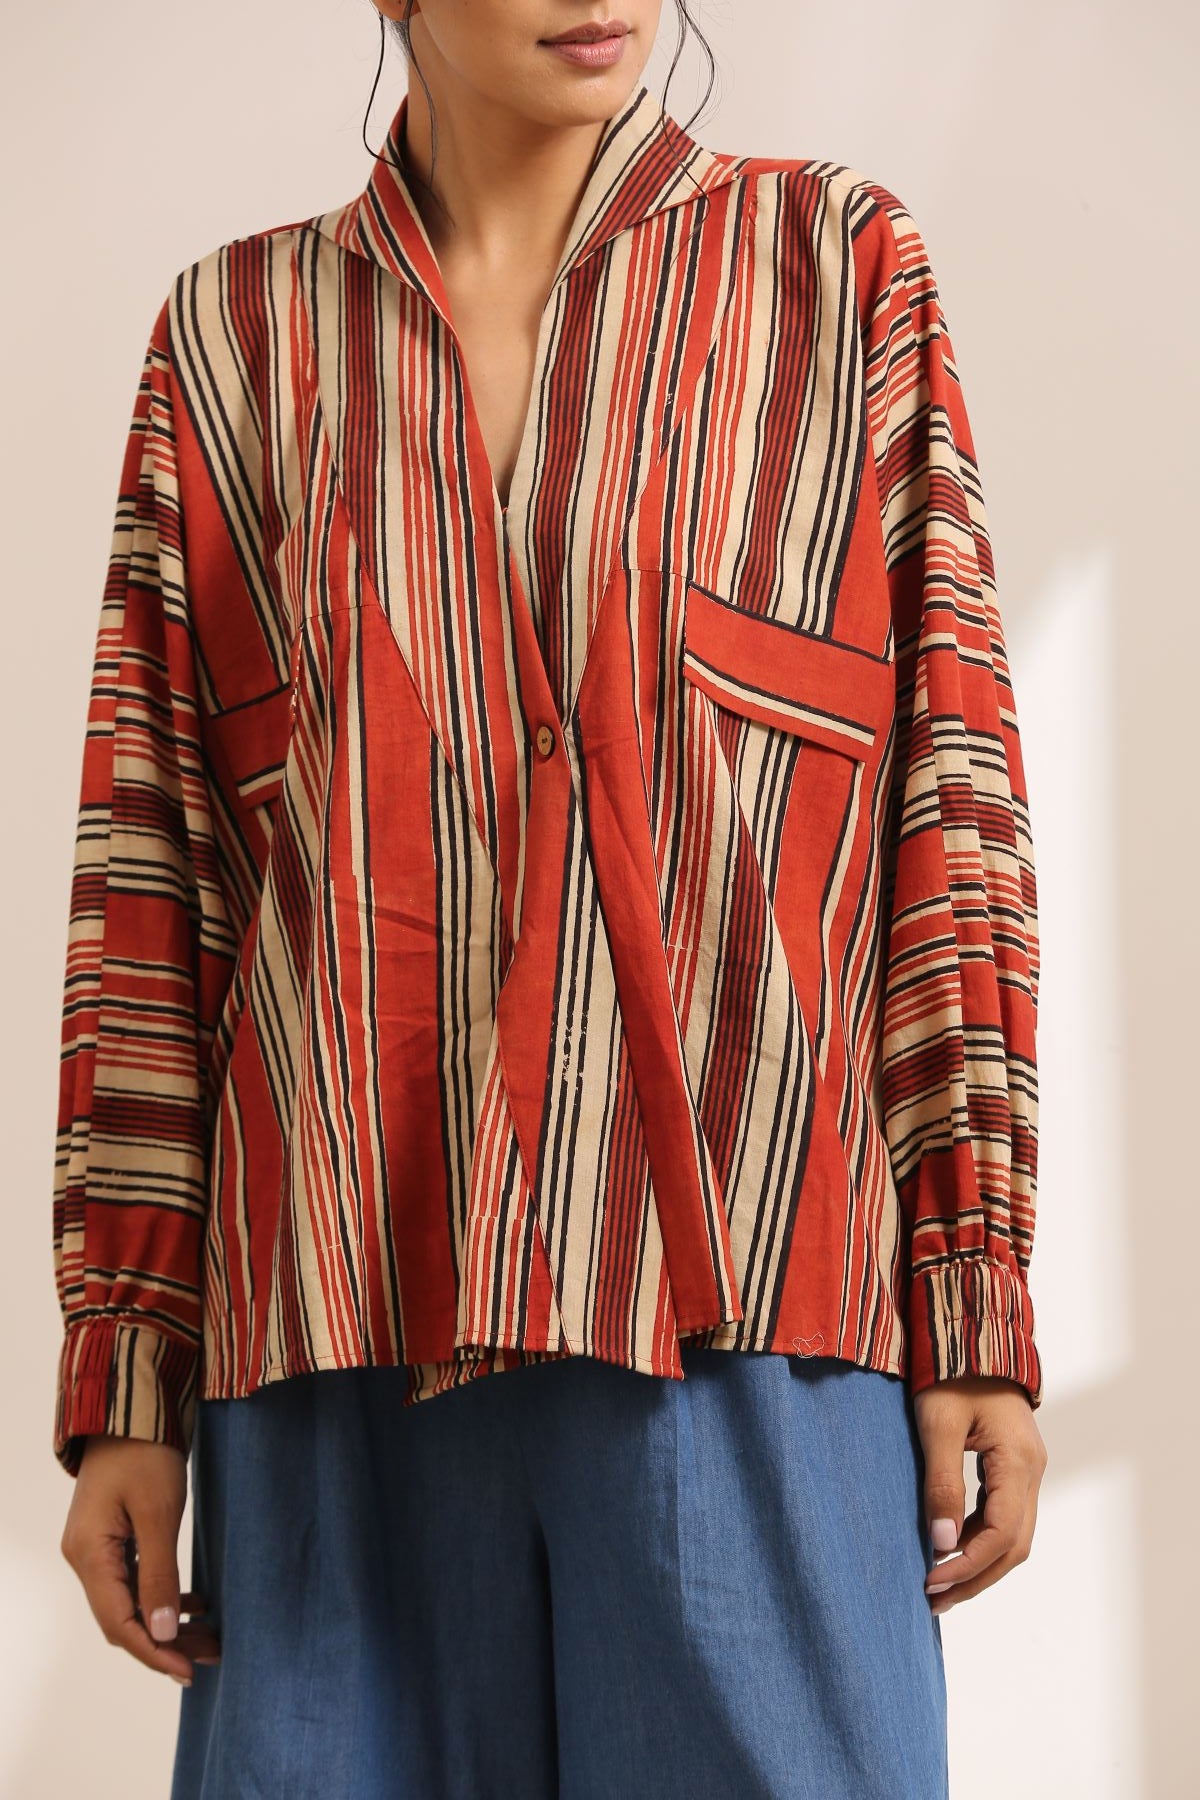 ON SALE- Mia- Striped overlay with denim trousers